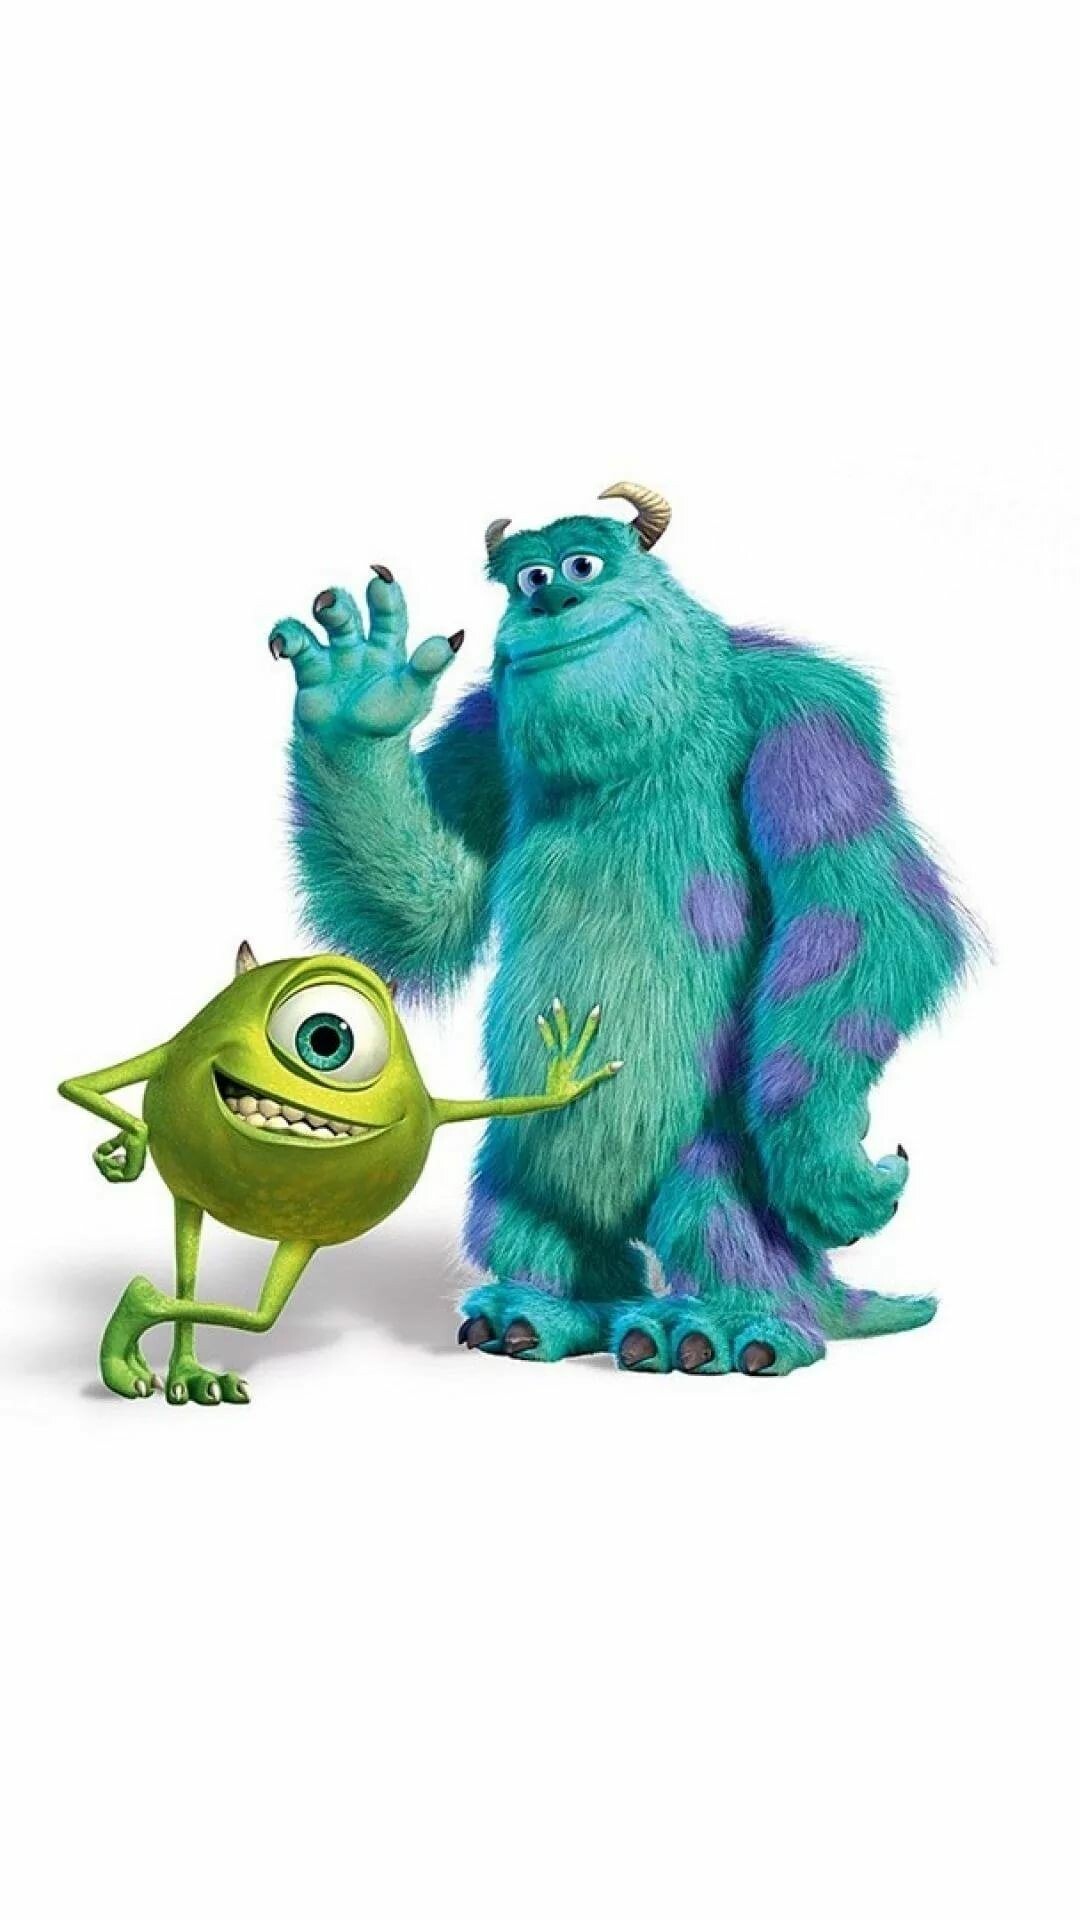 Monsters, Inc.: The film won the Academy Award for Best Original Song, Released by Walt Disney Pictures. 1080x1920 Full HD Wallpaper.